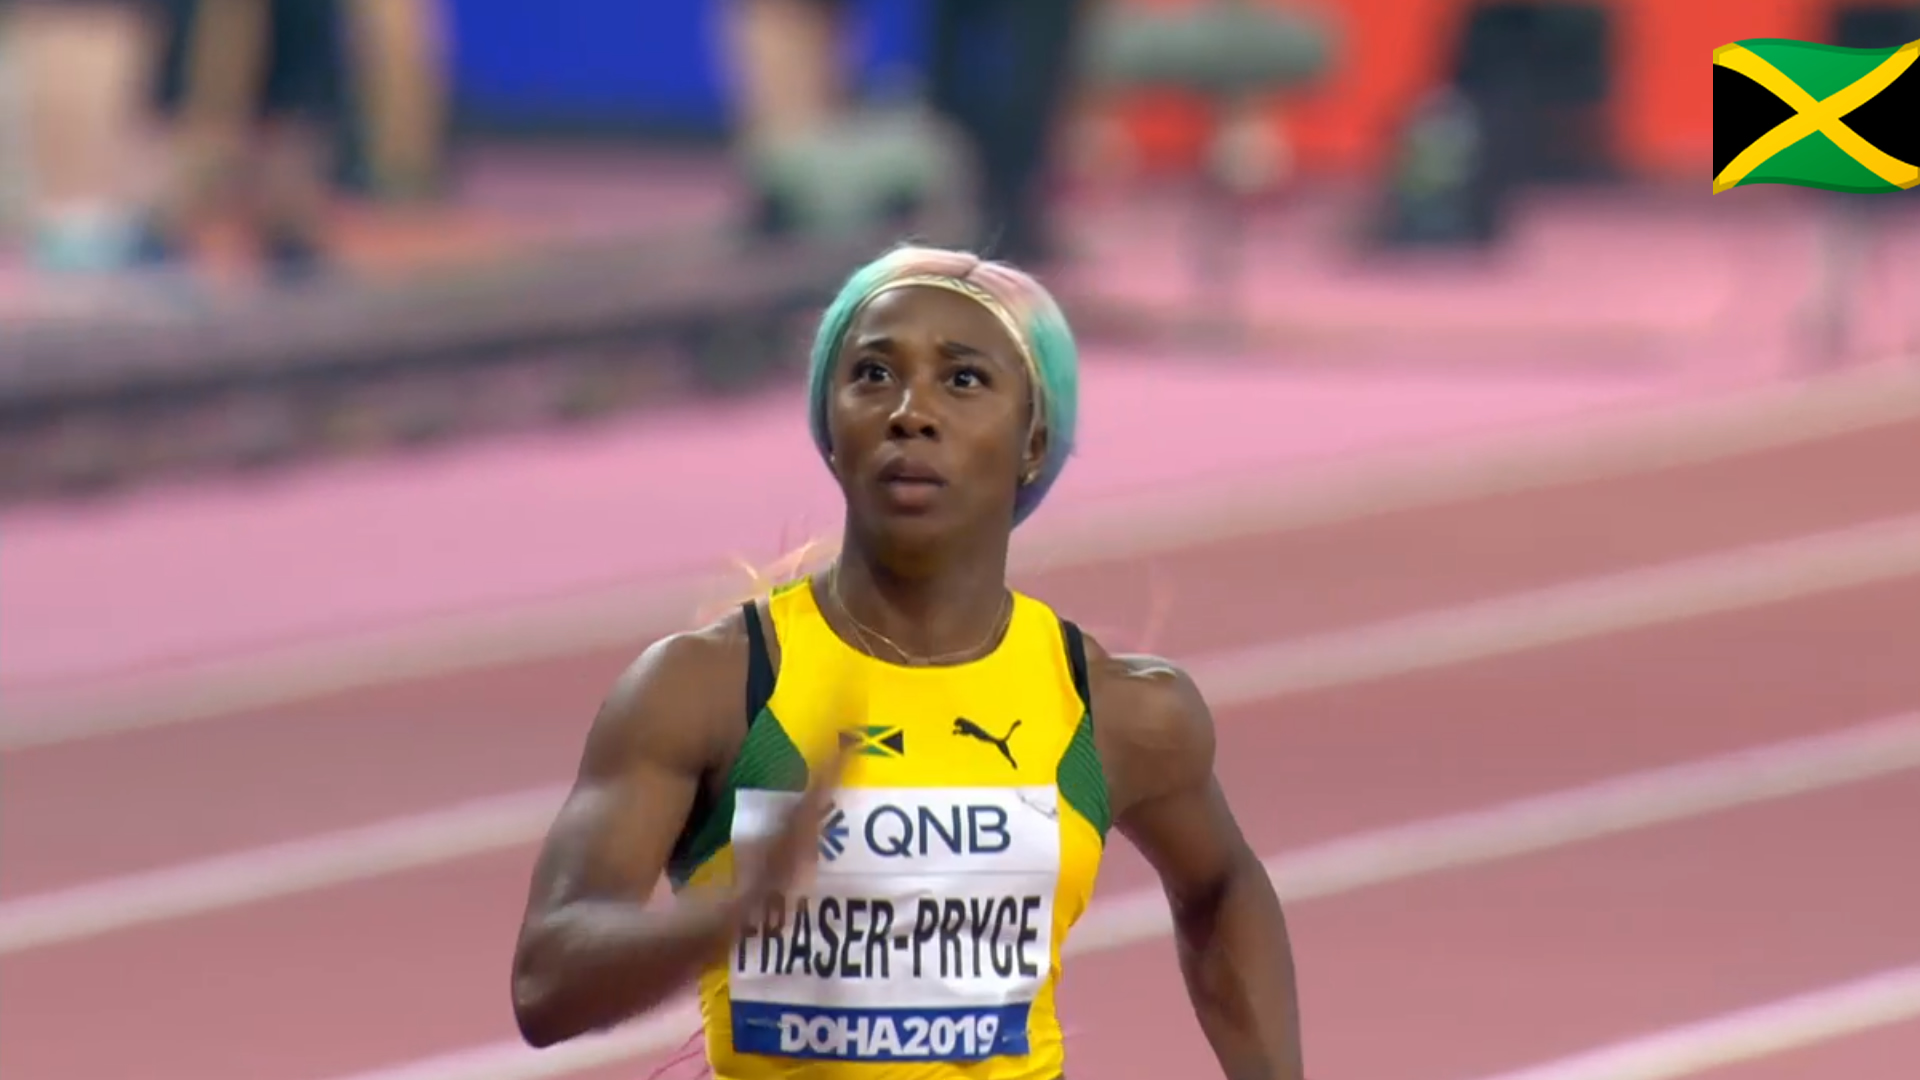 Watch: Shelly-Ann Fraser-Pryce wins 100m semi, qualifies for Final At World Champs